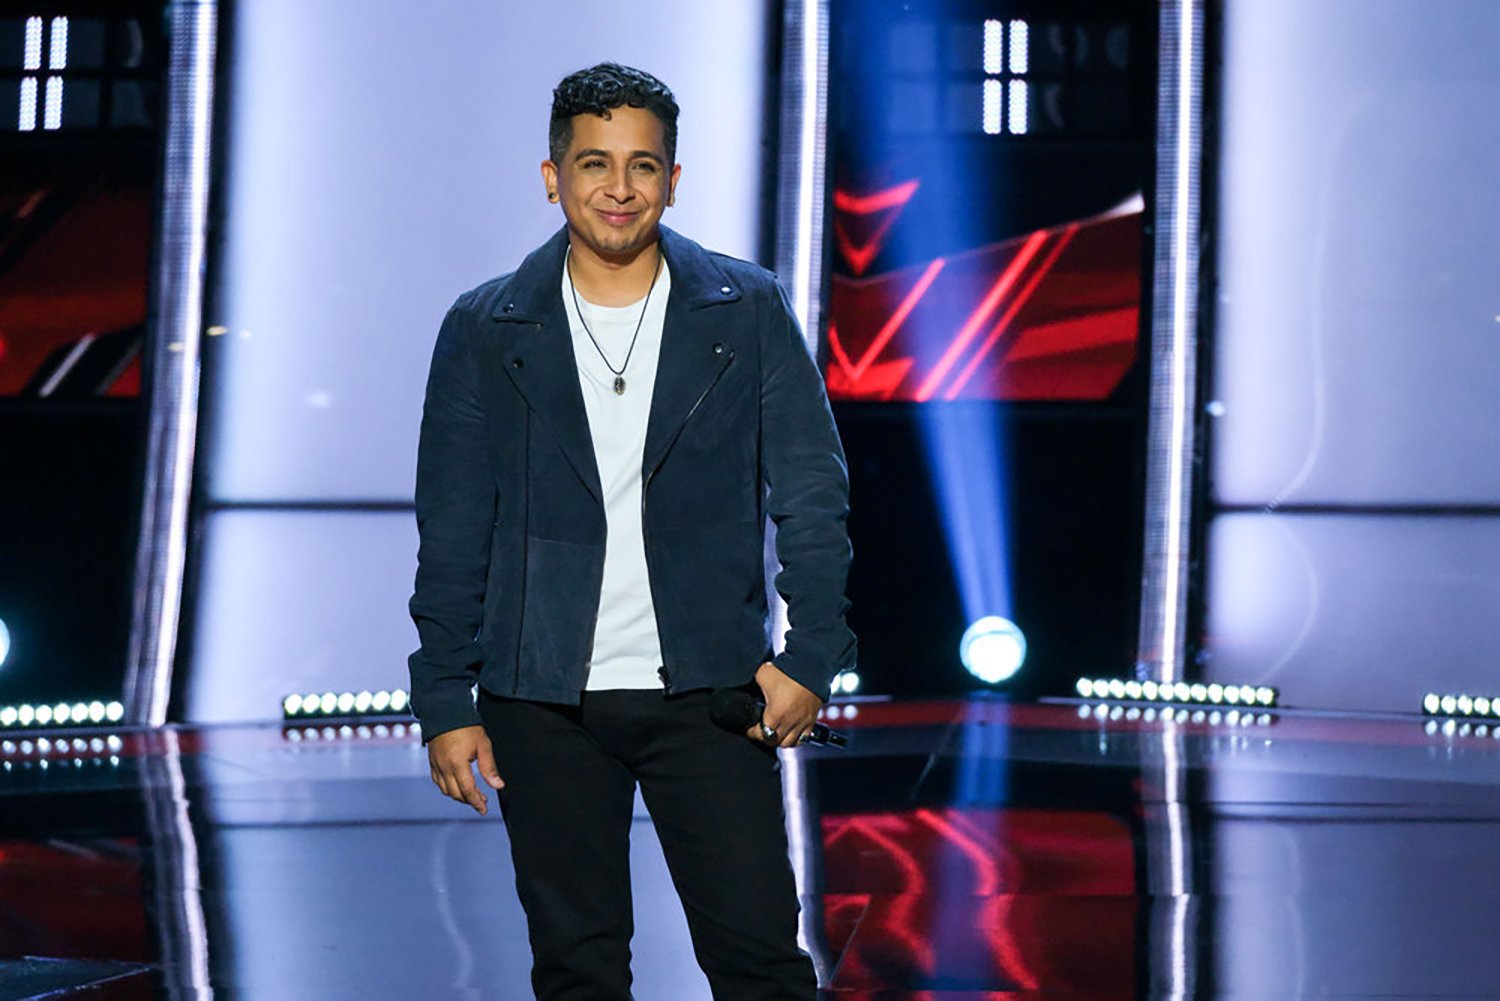 'The Voice' Season 22 Who Is Omar Cardona? 5 Things to Know About the